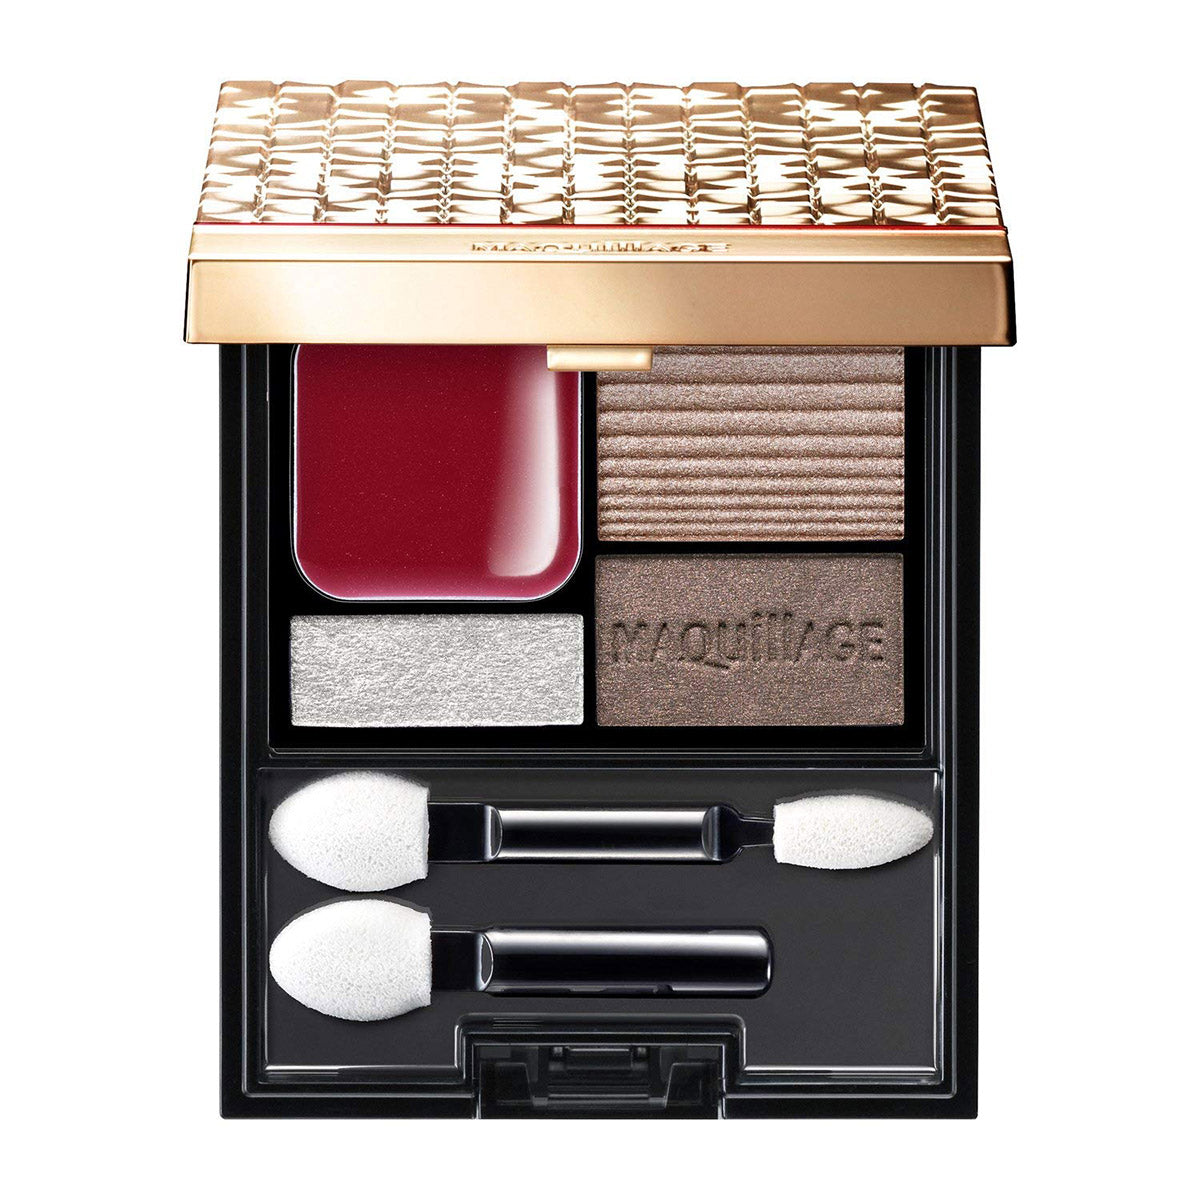 Shiseido Maquillage Dramatic Styling Eyes D - Pallet Shadows, 4 Colors